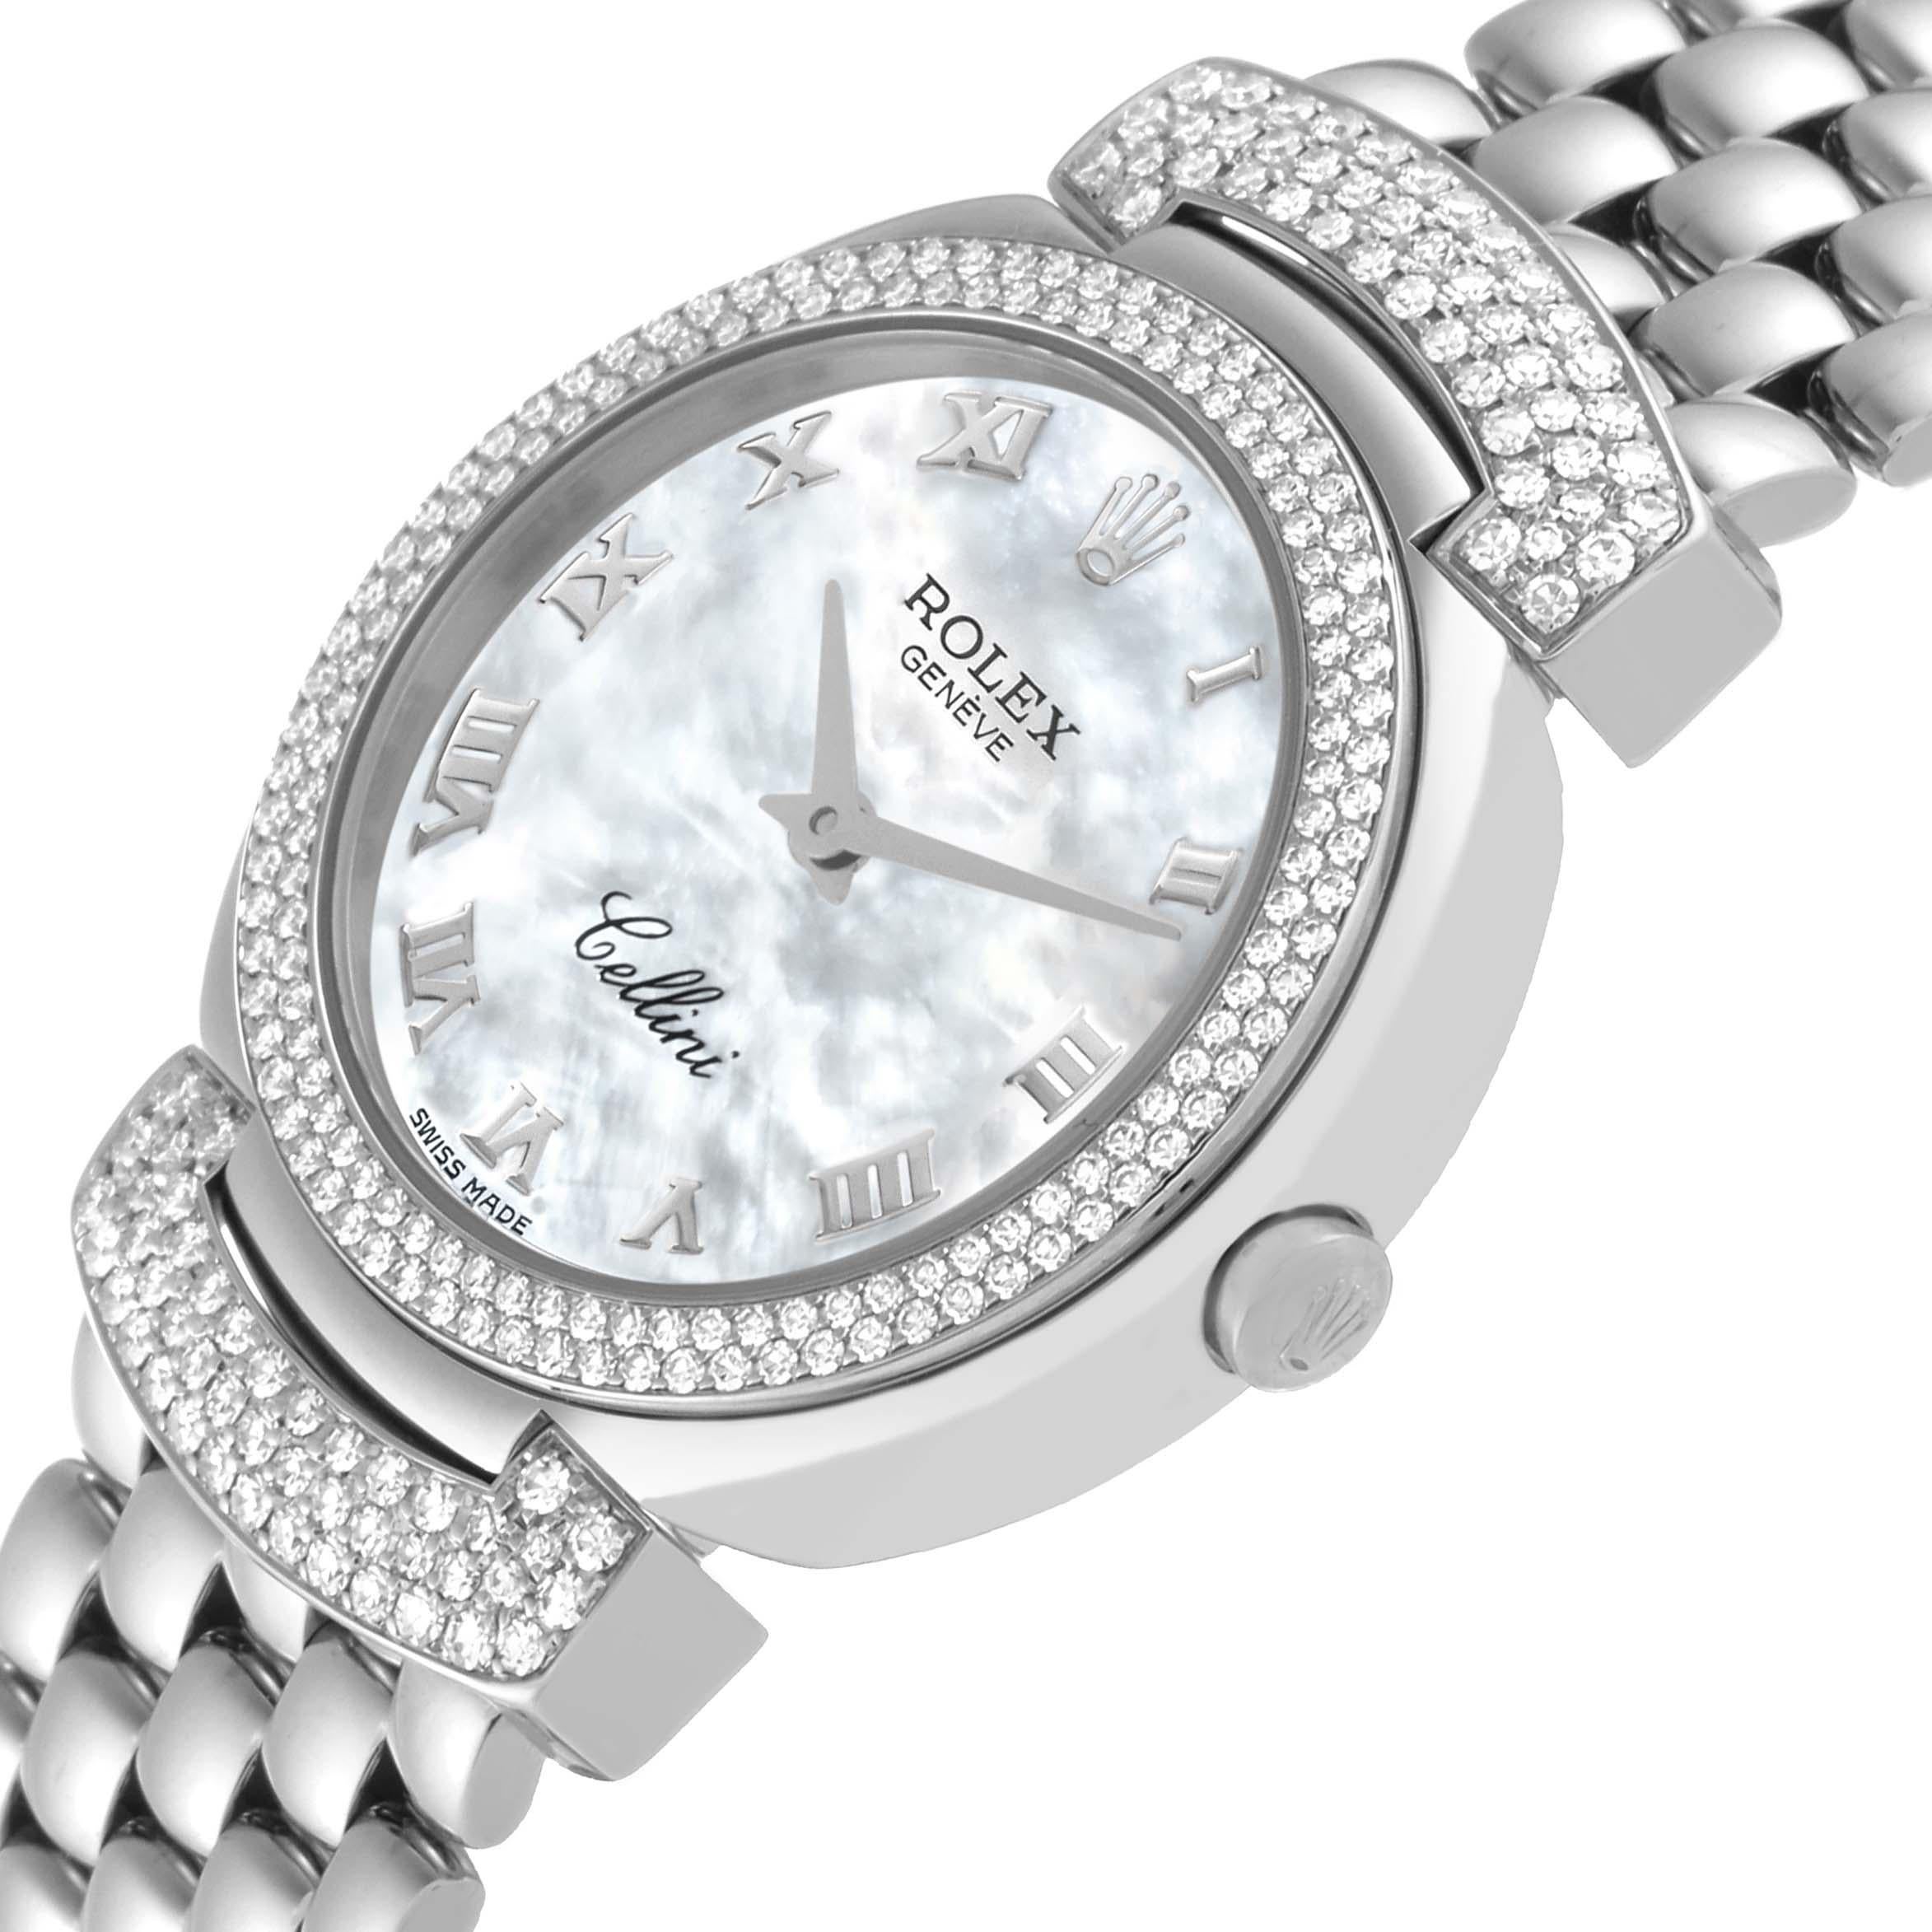 Rolex Cellini Cellissima White Gold Mother Of Pearl Dial Diamond Ladies Watch For Sale 3